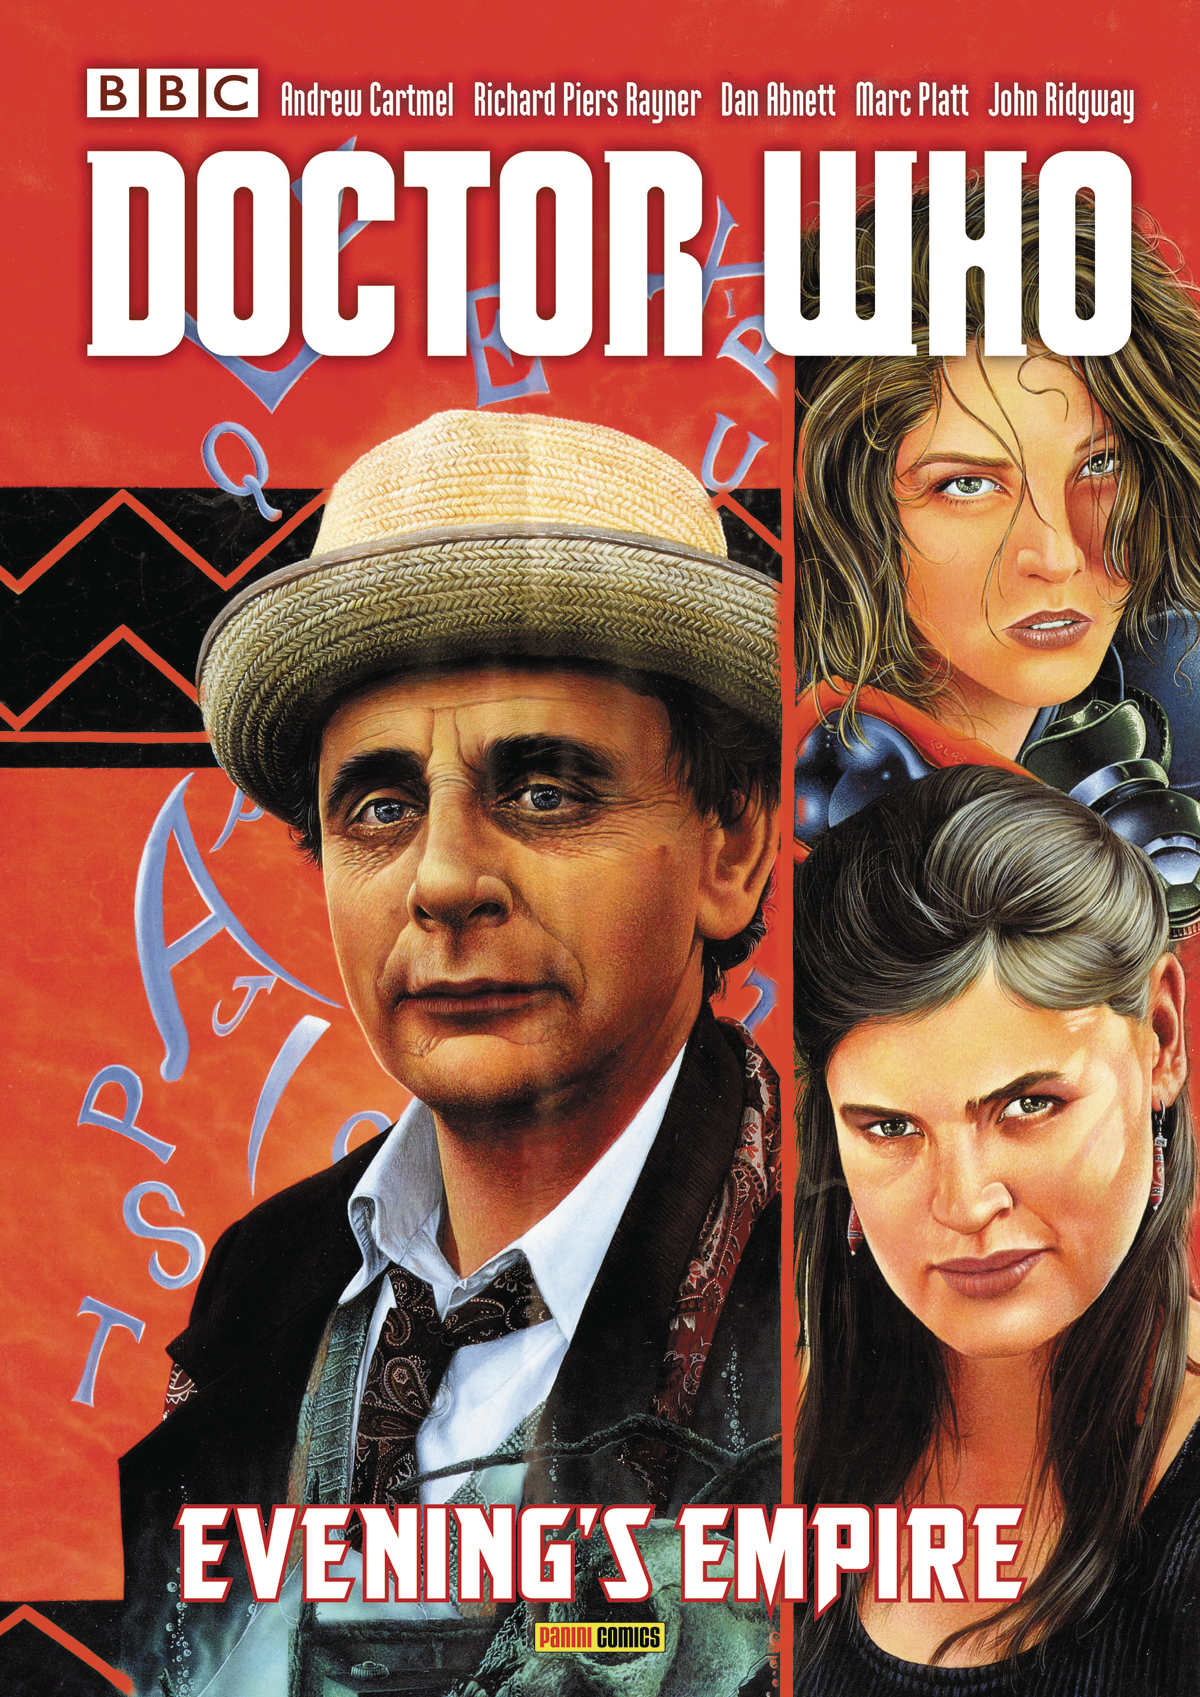 Doctor Who Graphic Novel Evenings Empire